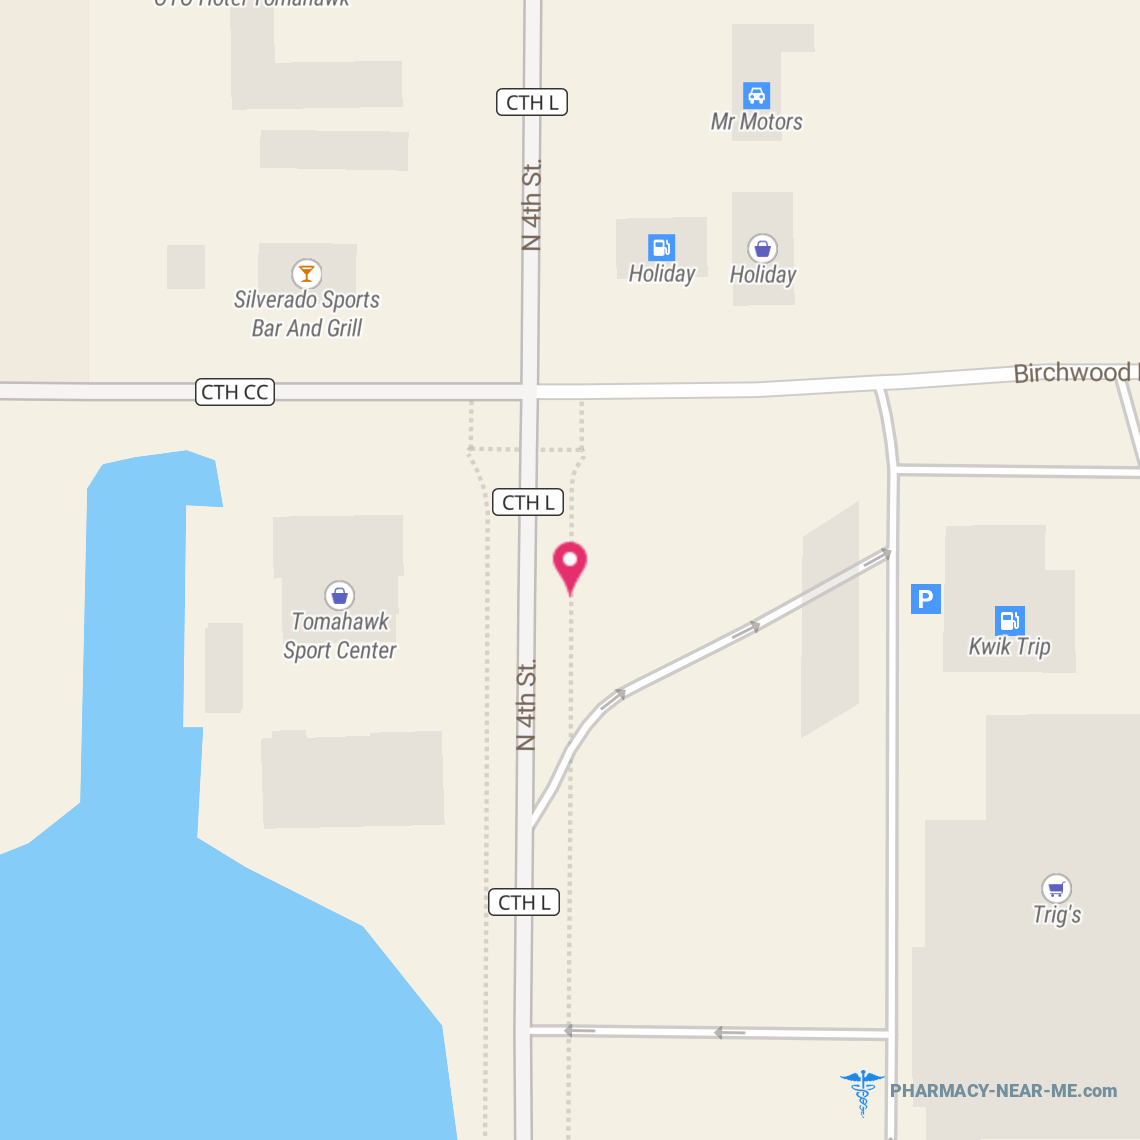 NORTHBAY PHARMACY, INC - Pharmacy Hours, Phone, Reviews & Information: 686 North 4th Street, Tomahawk, Wisconsin 54487, United States